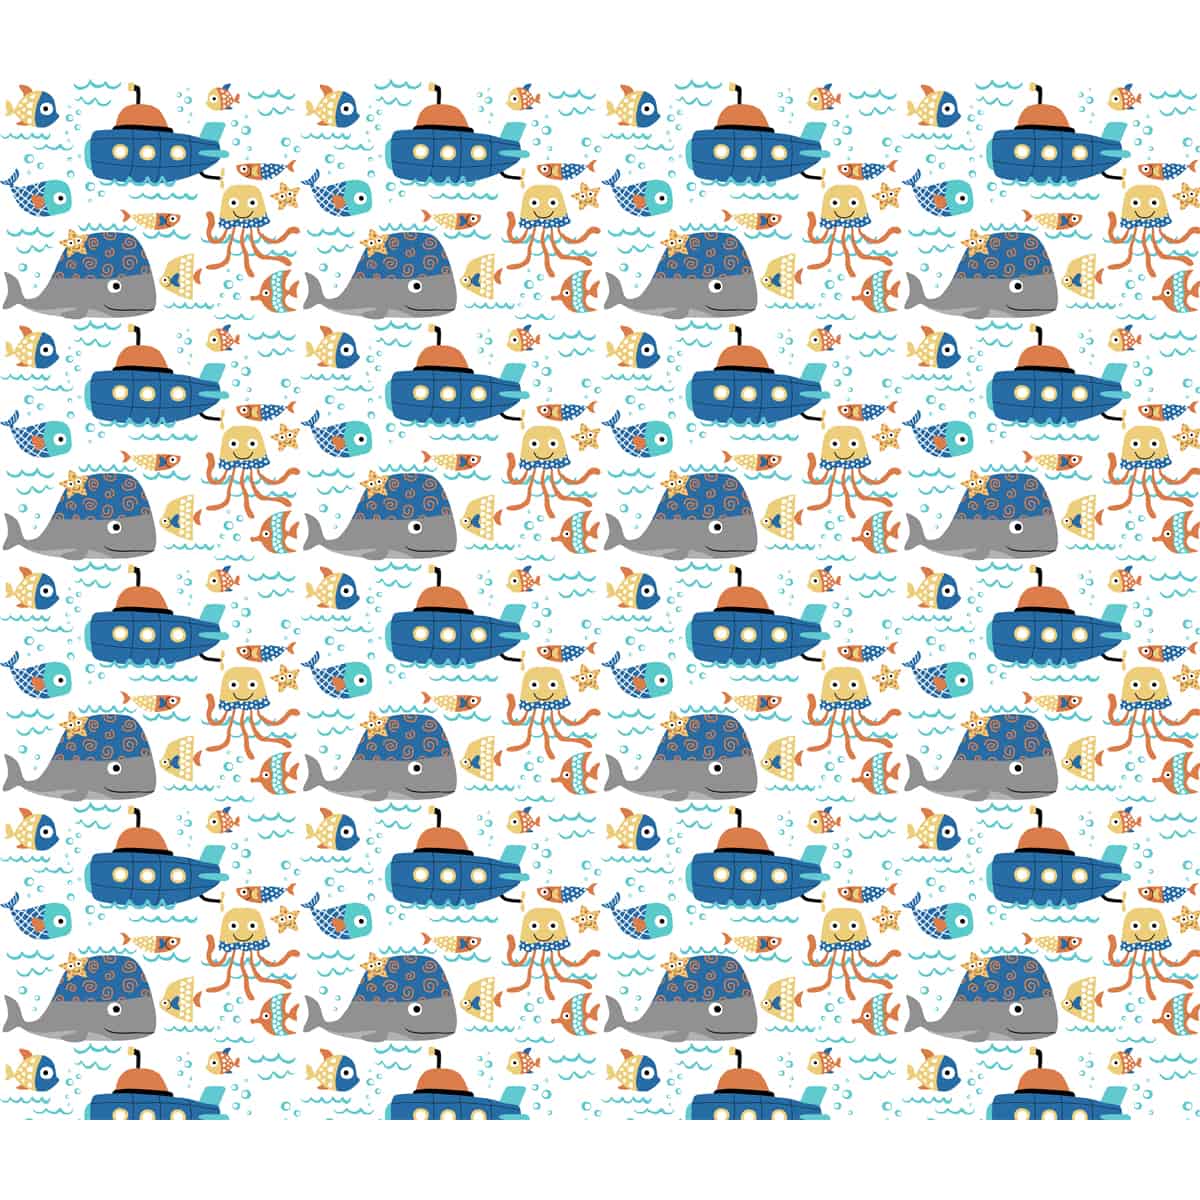 Cute Underwater Theme Wallpaper with Whale and Ships, Customised